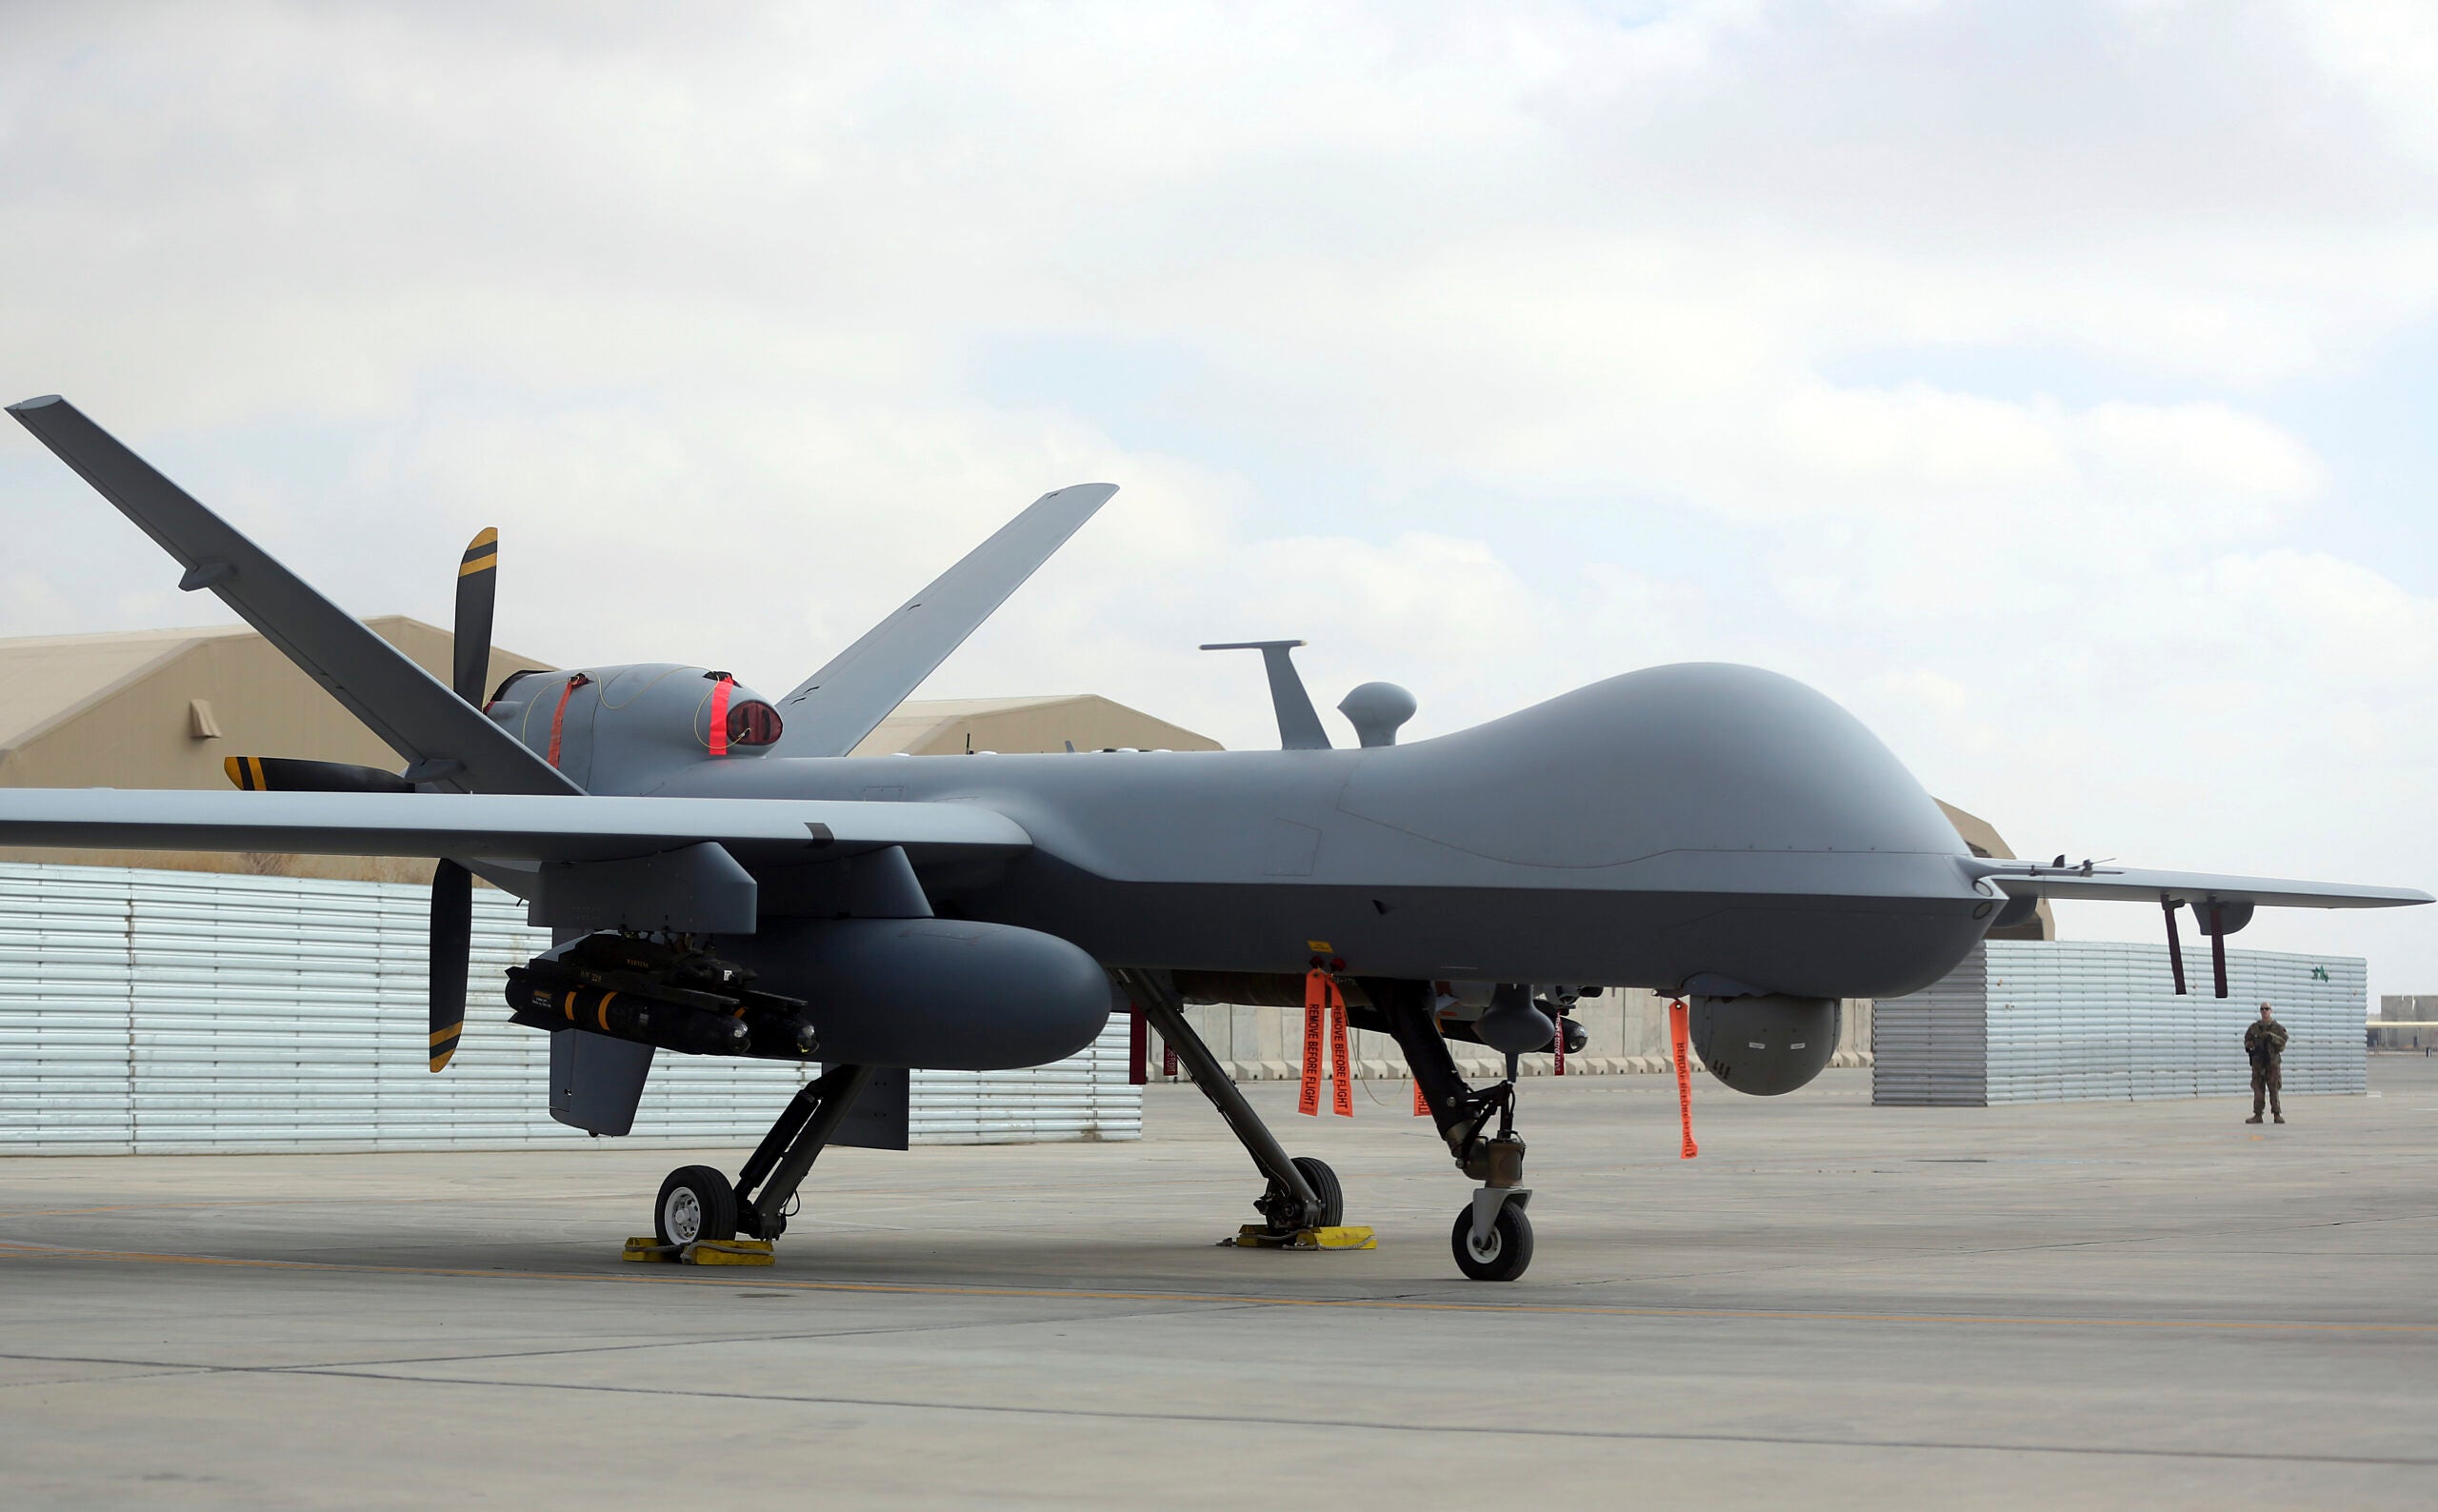 A U.S. MQ-9 drone is on display during an air show